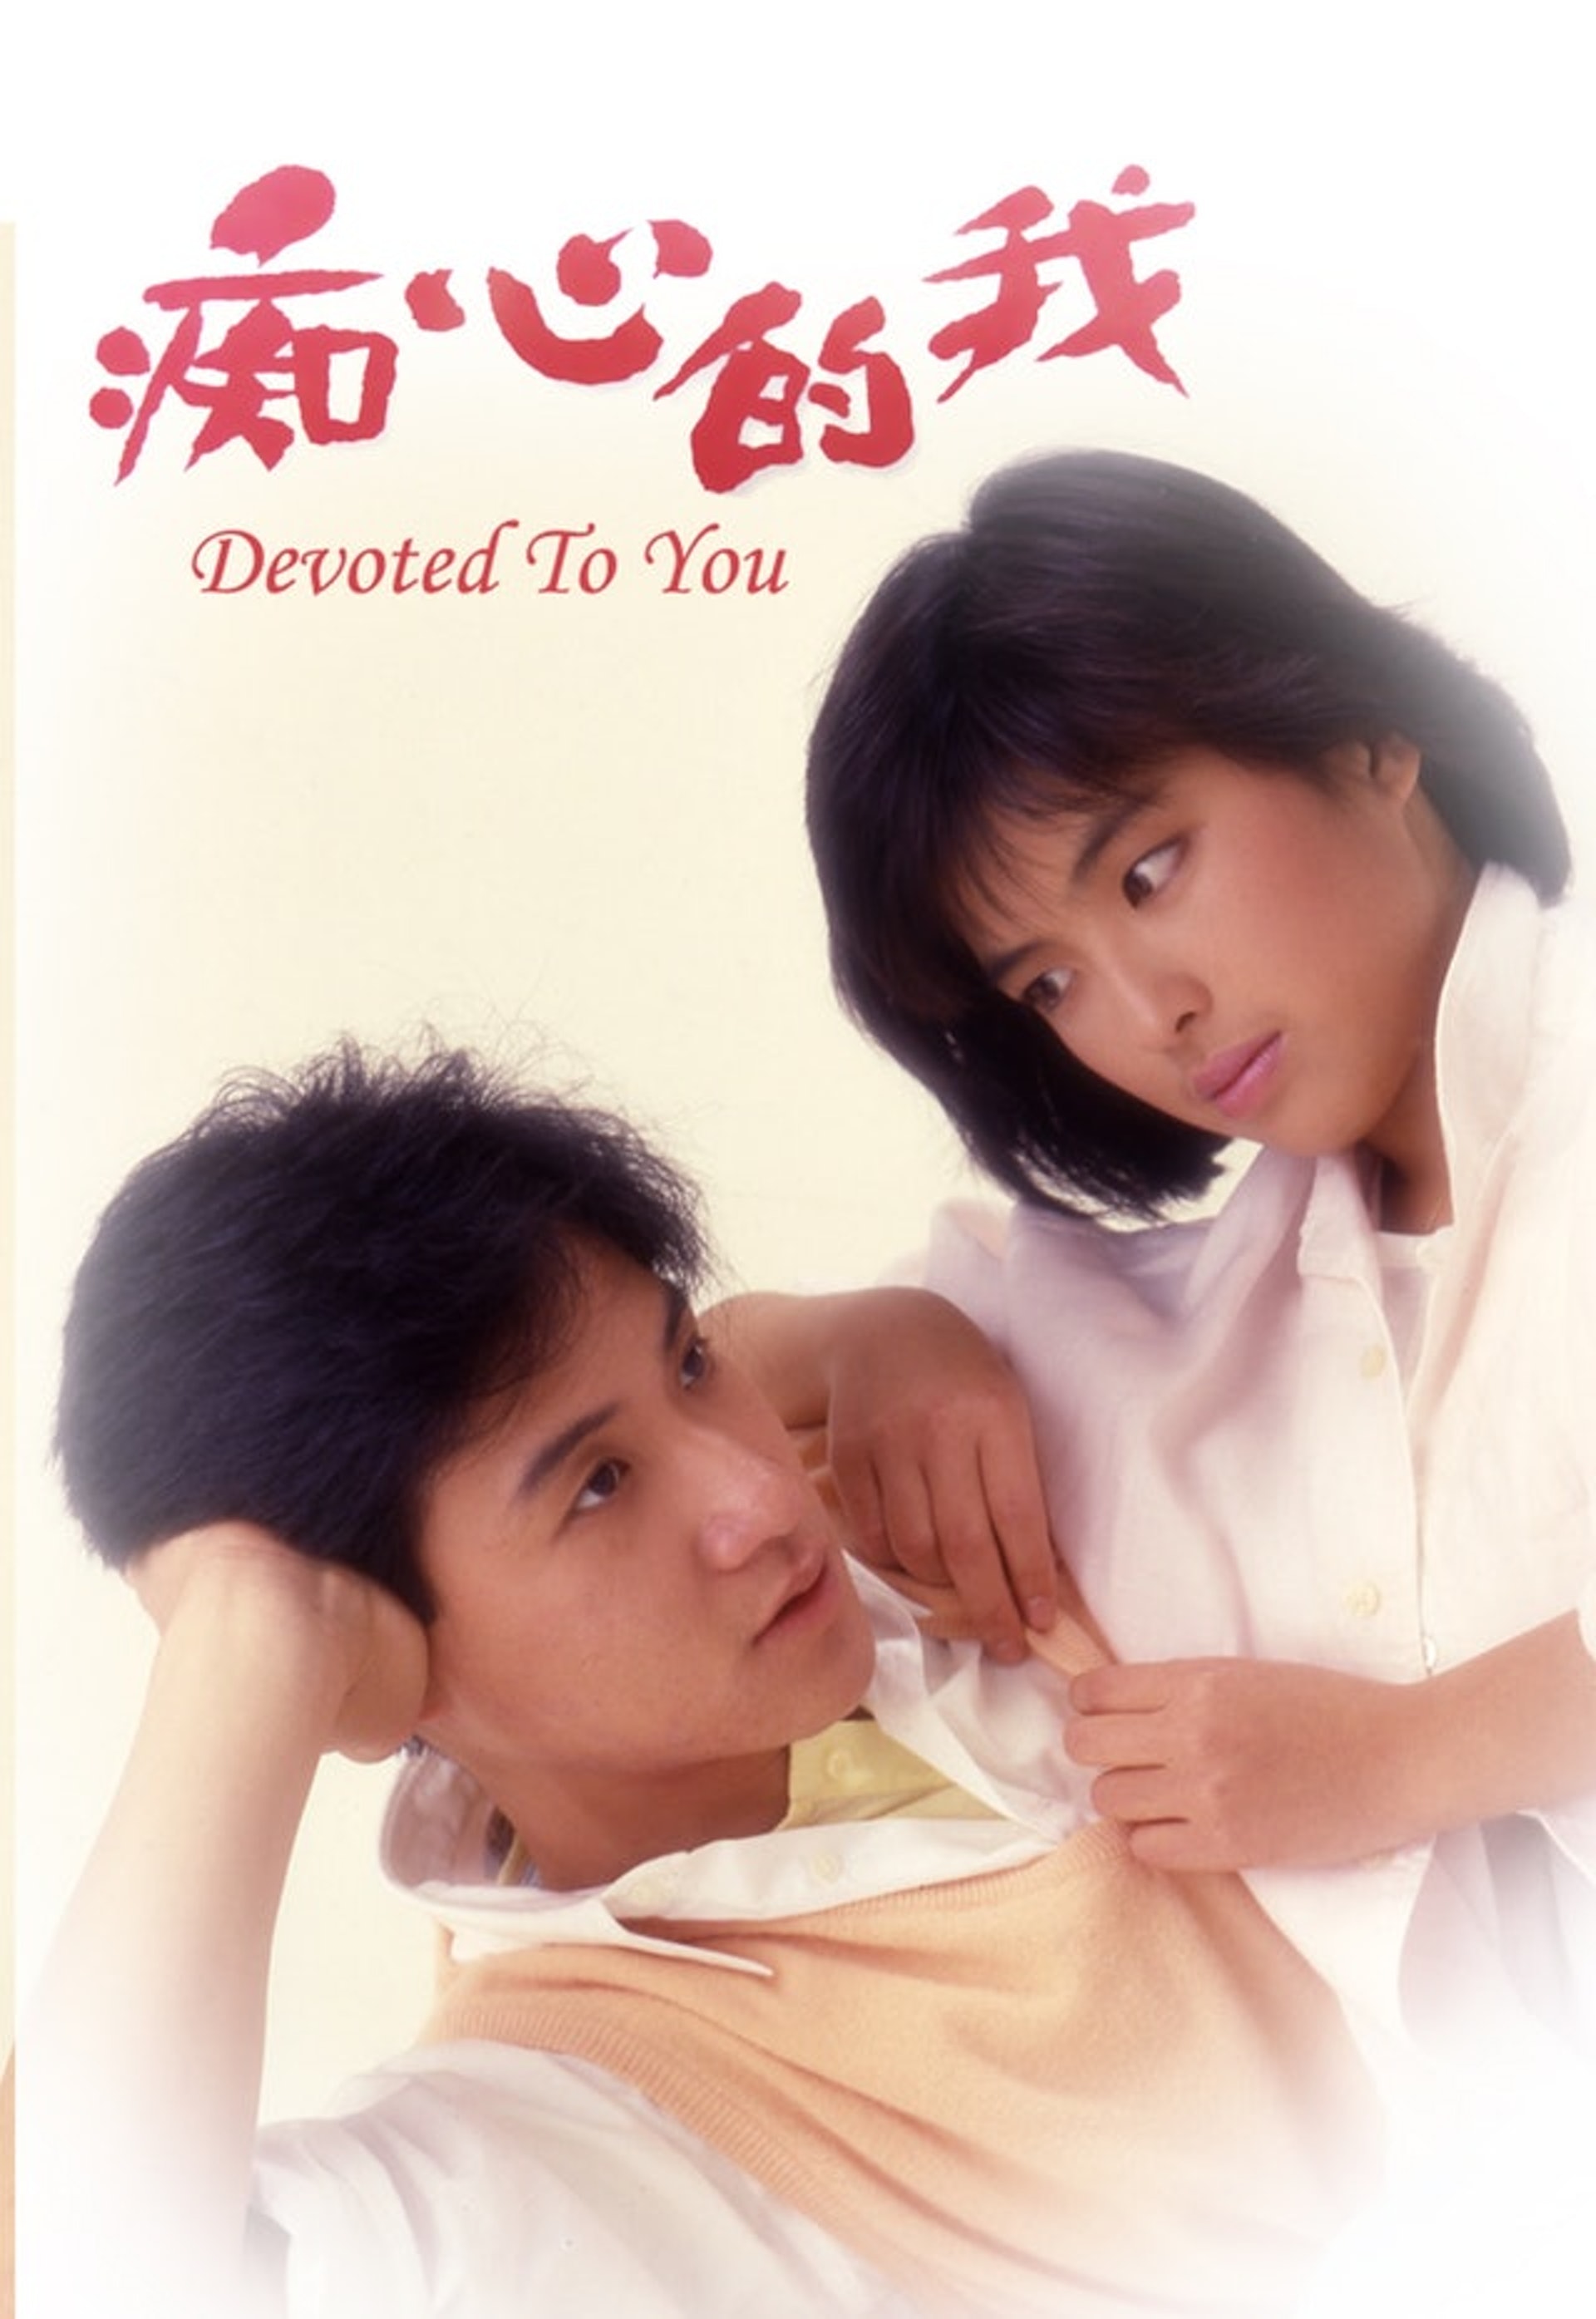 Jackie and his wife May Lo met on the set of 1986 film Devoted To You